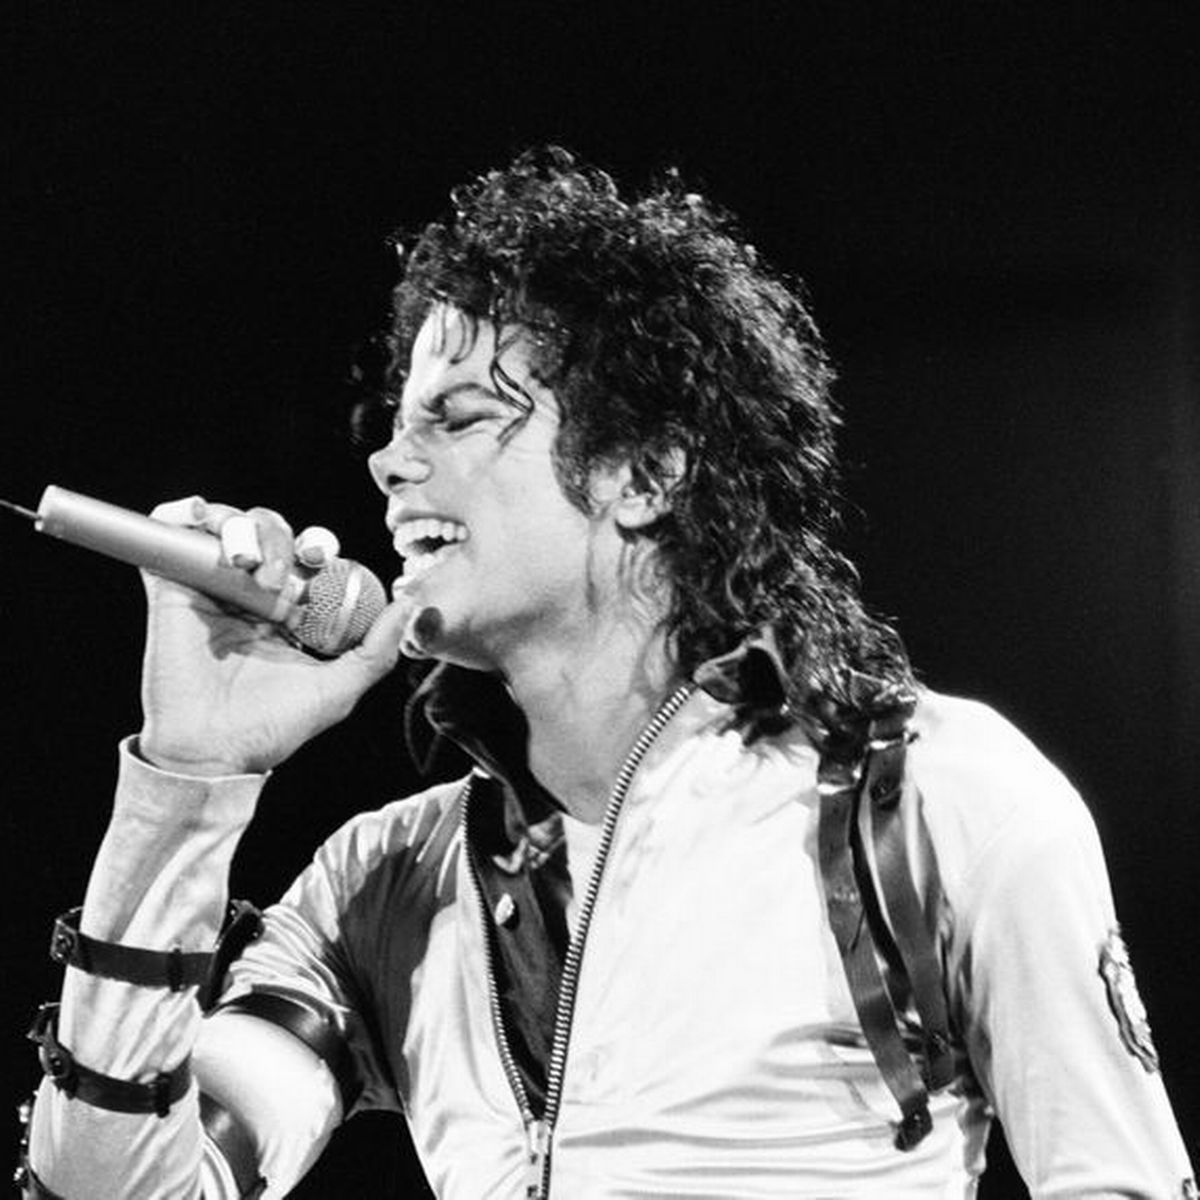 Michael jackson performing on stage in 1983 - Michael Jackson